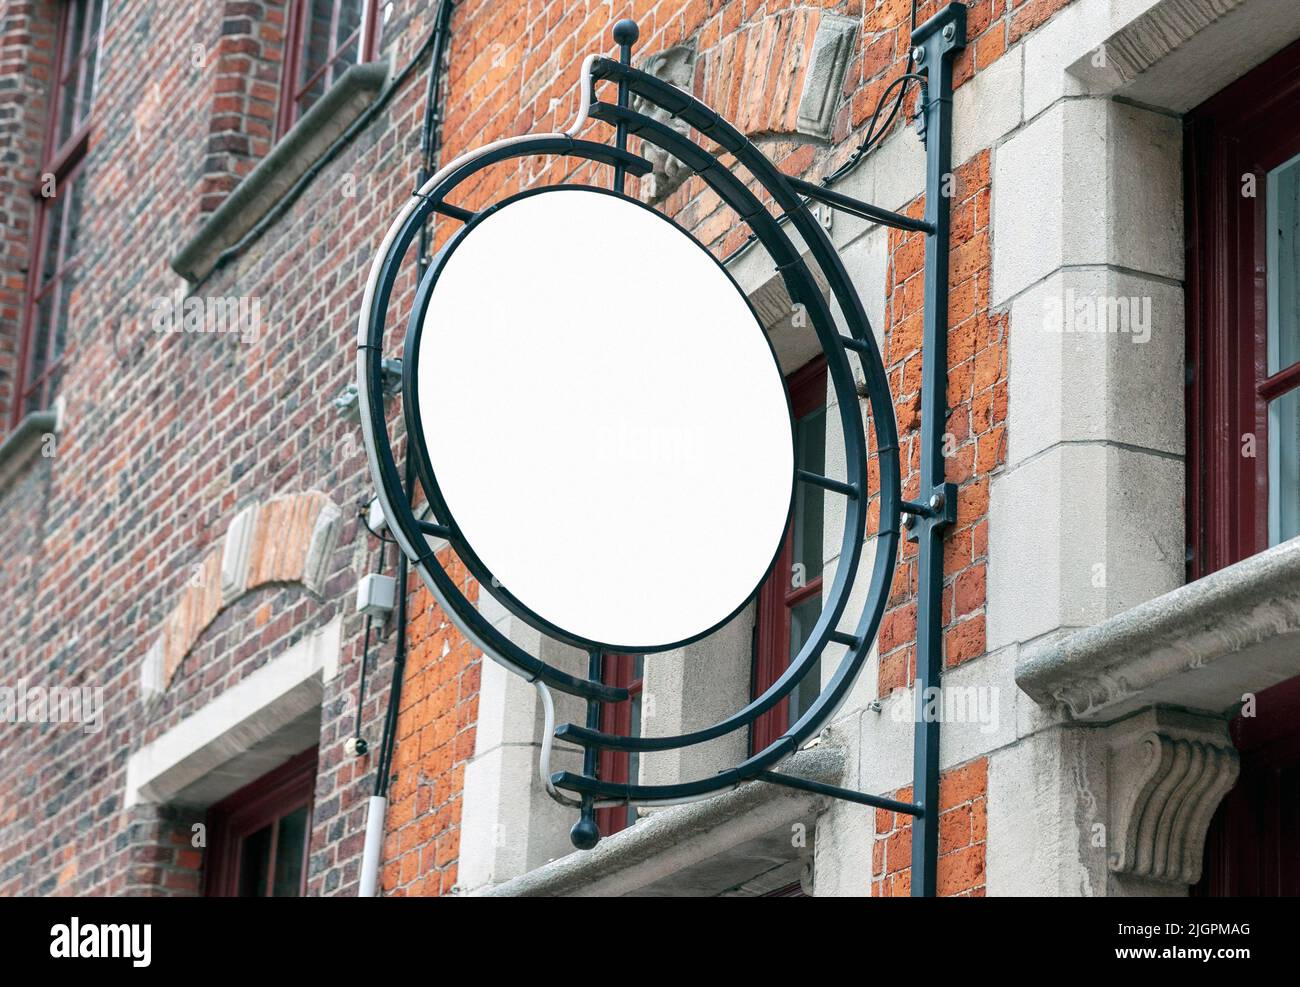 Circle mockup of street signboard on old brick wall, blank signage to add company or restaurant logo Stock Photo